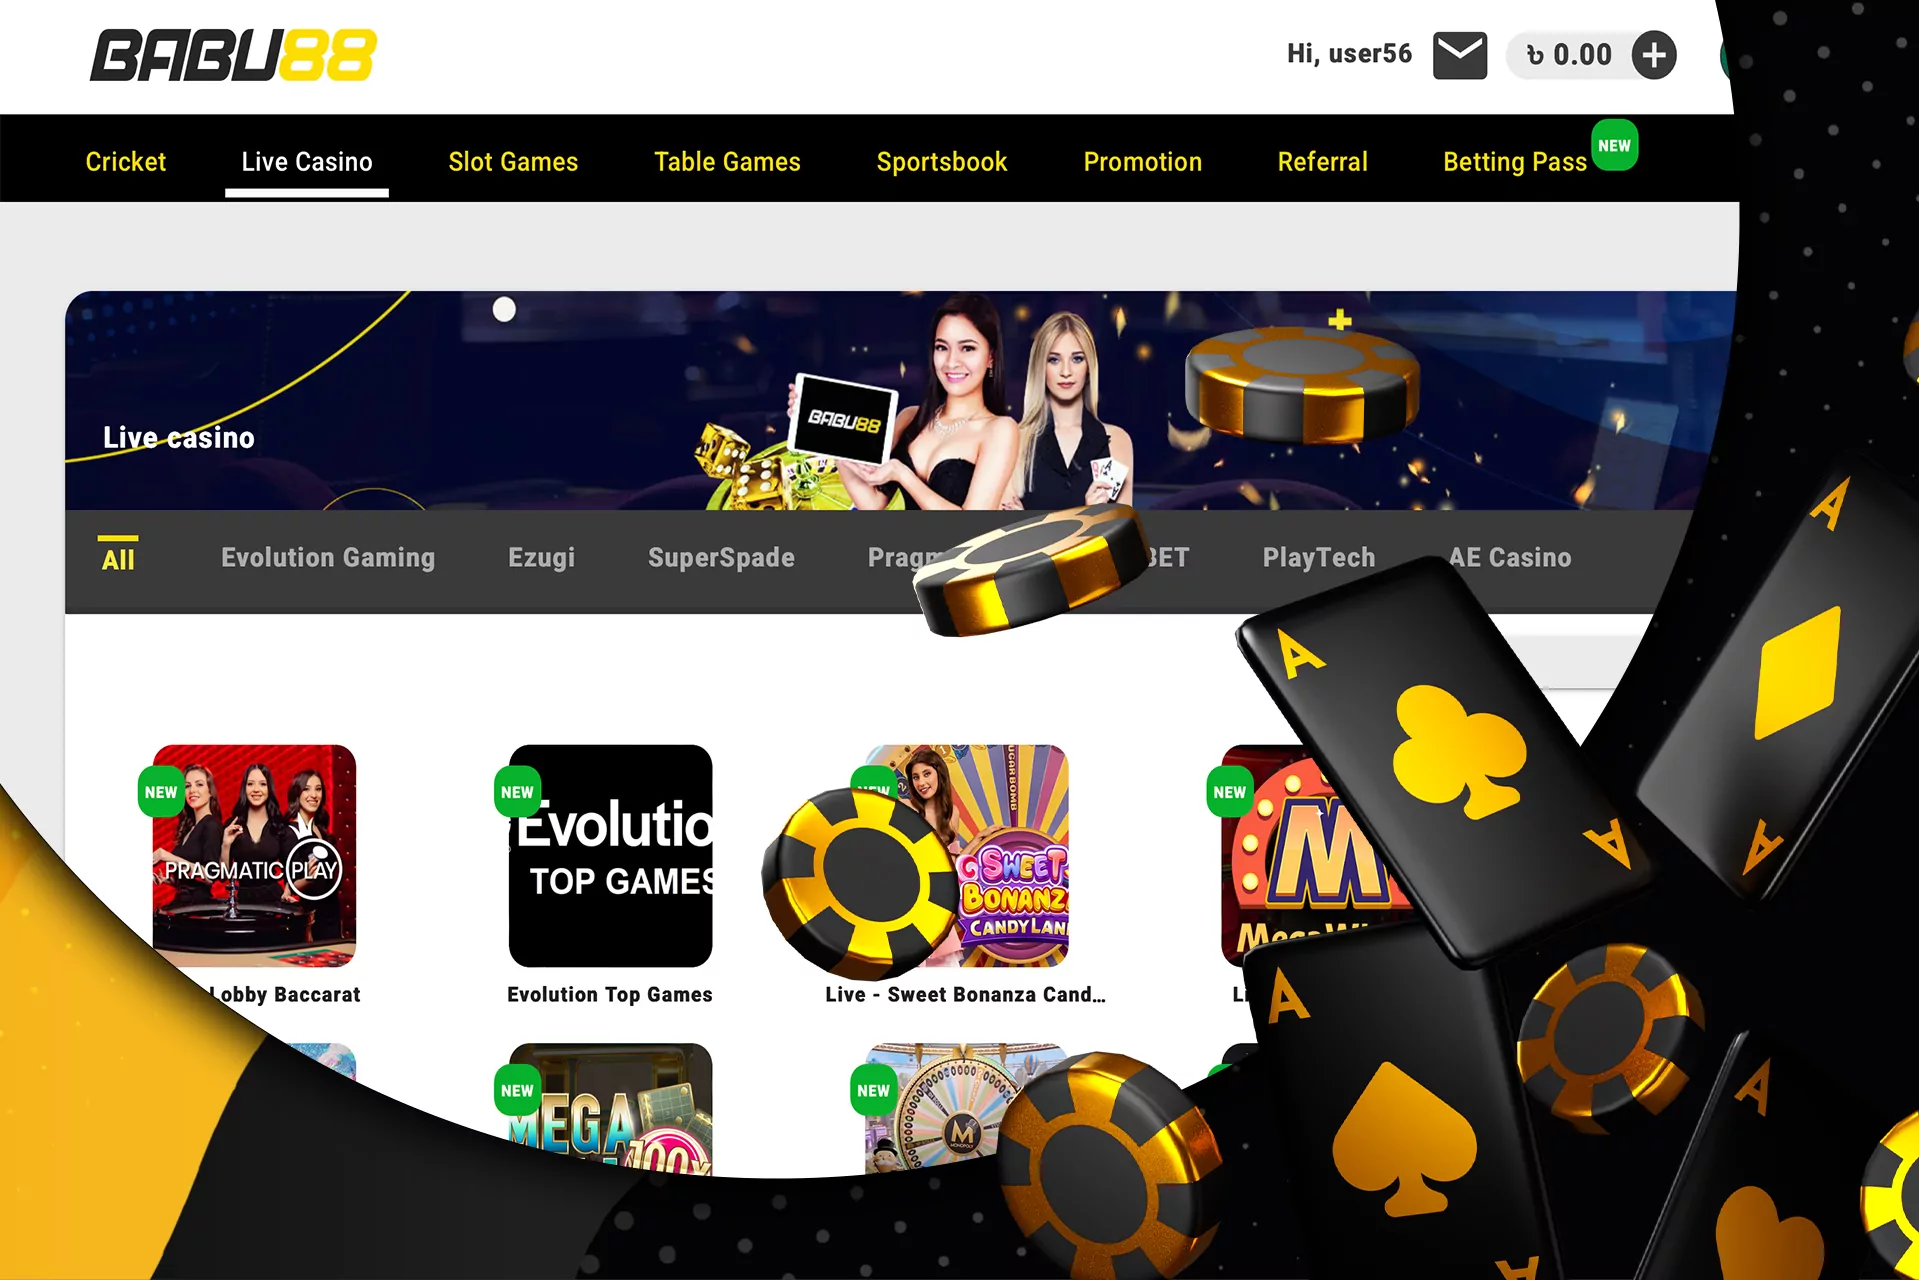 Babu88 has a great section of online casino games for every taste.